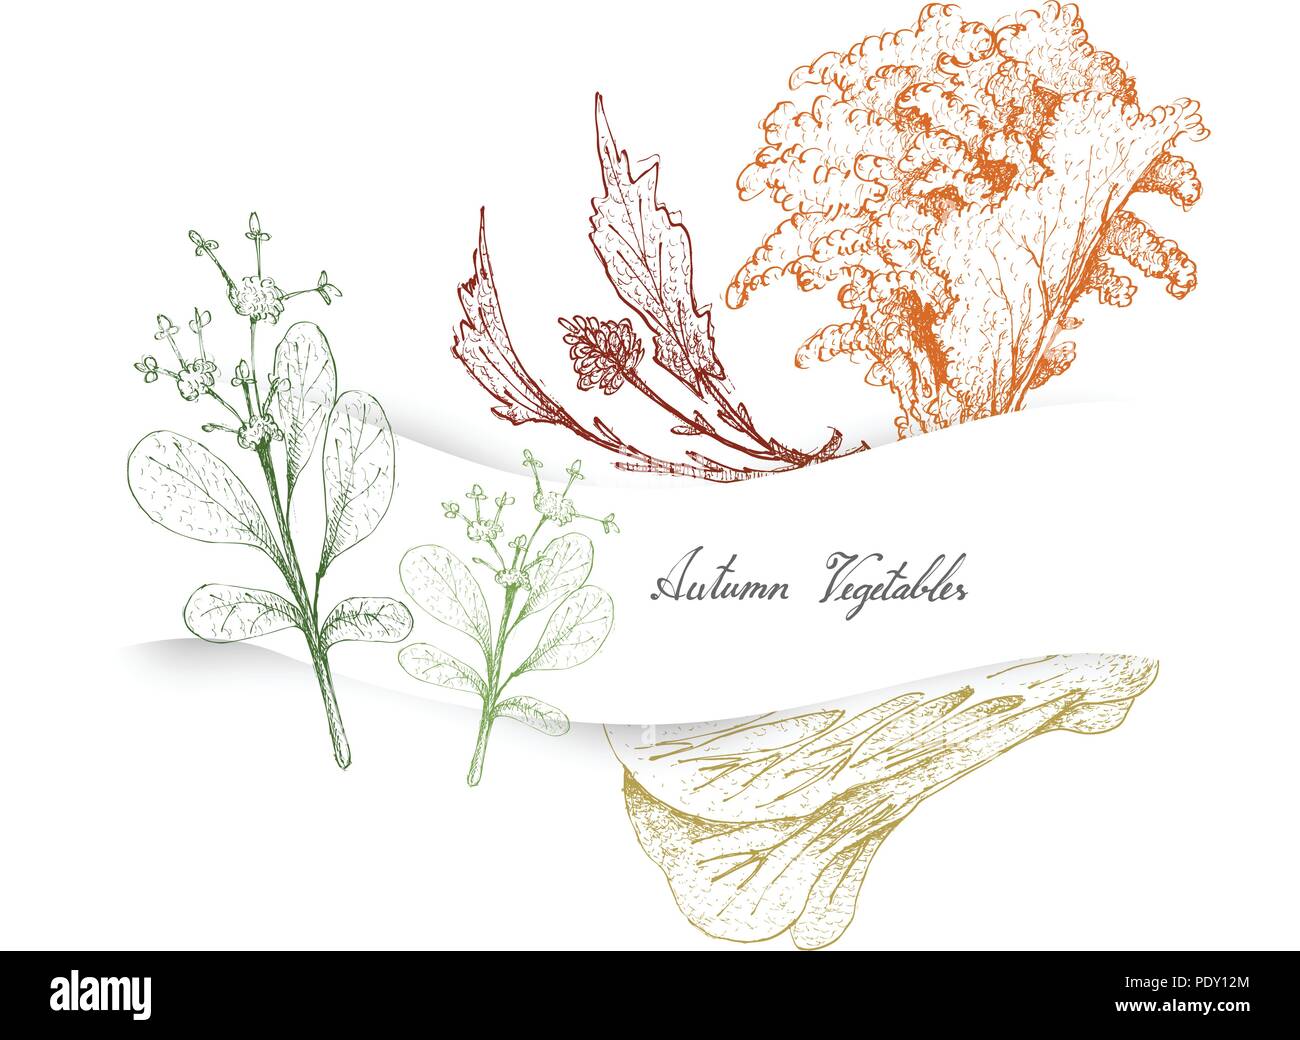 Autumn Vegetables, Illustration of Hand Drawn Sketch Lettuce or Lactuca Sativa, Paracress, Pak Choy and Rapini. Stock Vector